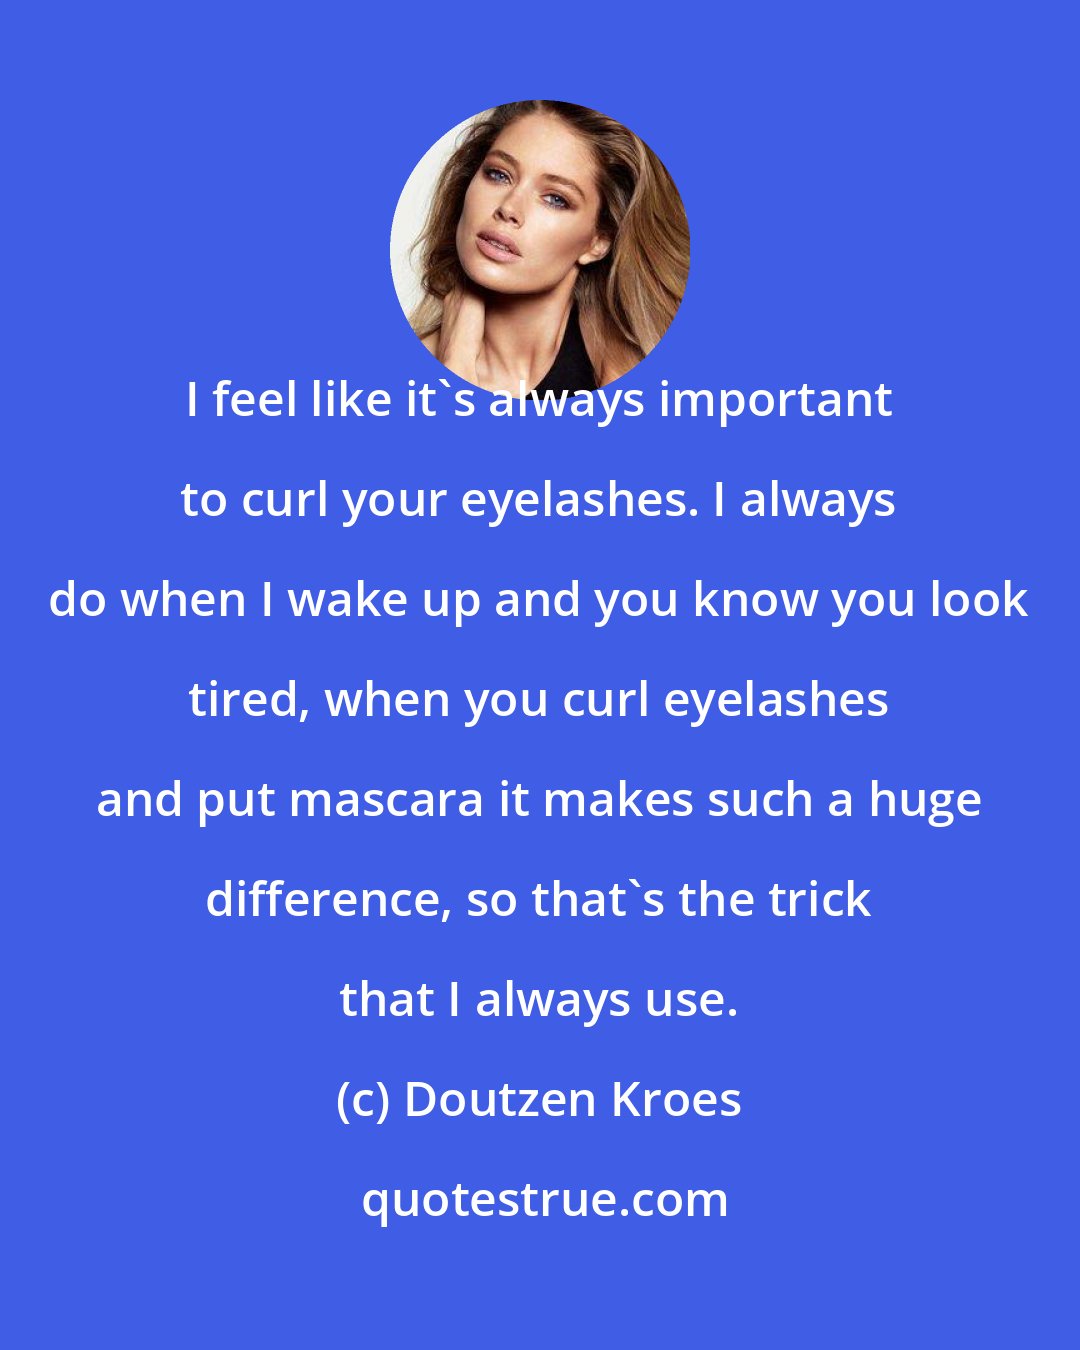 Doutzen Kroes: I feel like it's always important to curl your eyelashes. I always do when I wake up and you know you look tired, when you curl eyelashes and put mascara it makes such a huge difference, so that's the trick that I always use.